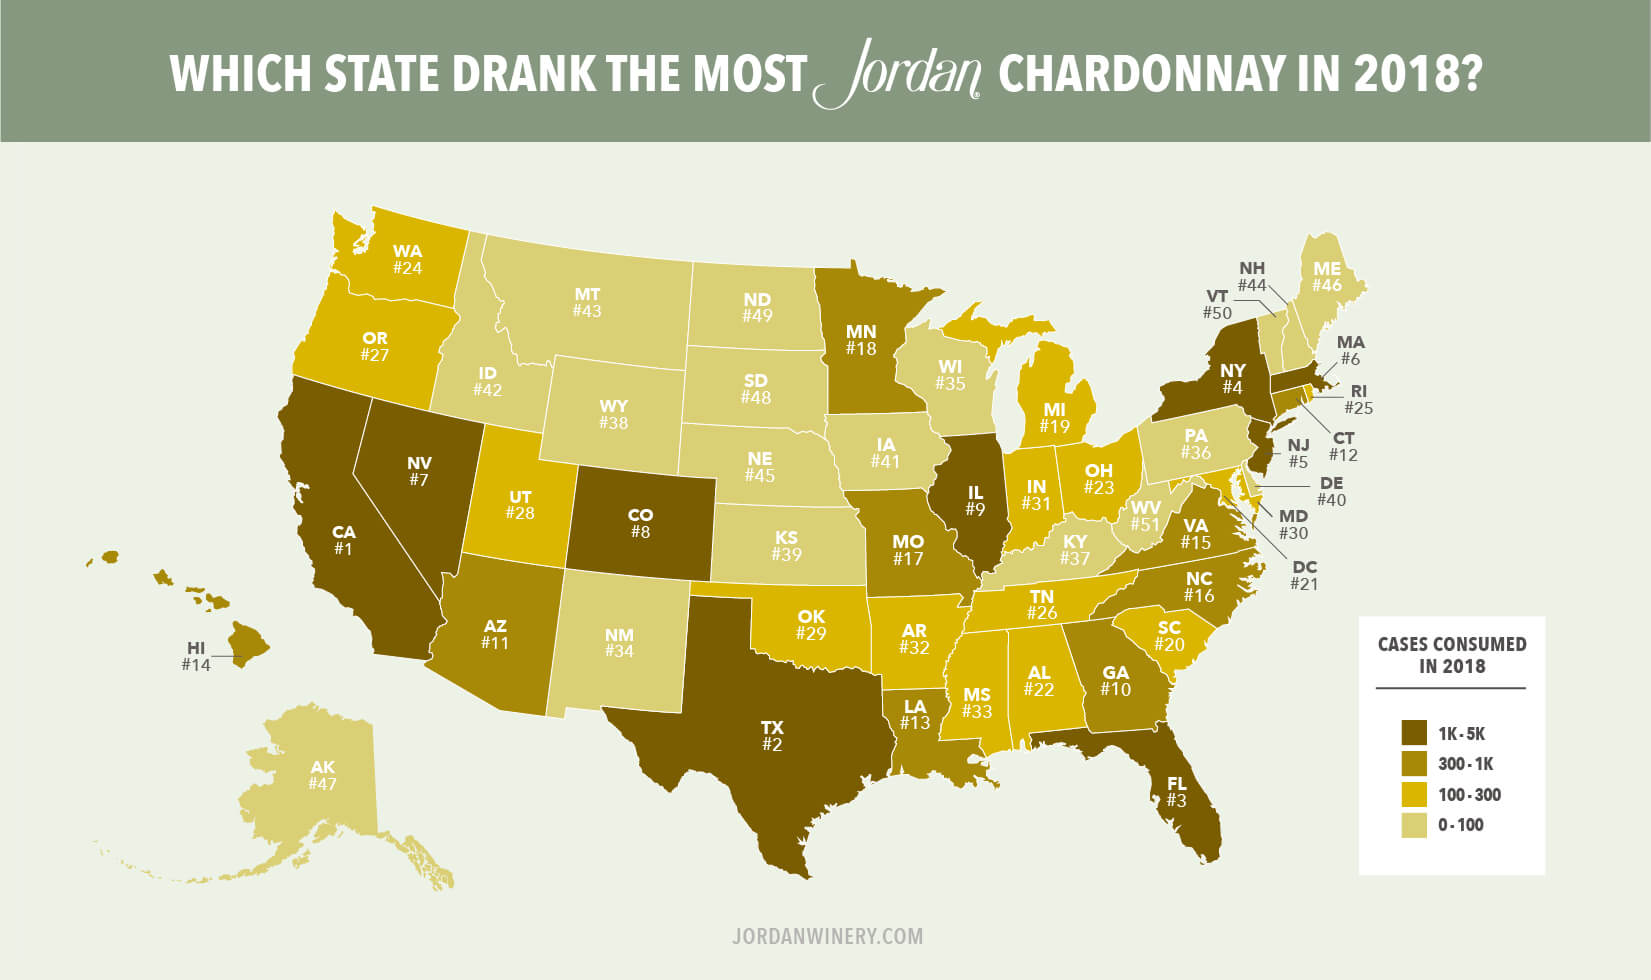 Jordan Chardonnay Map: Who Drank the Most by State 2018